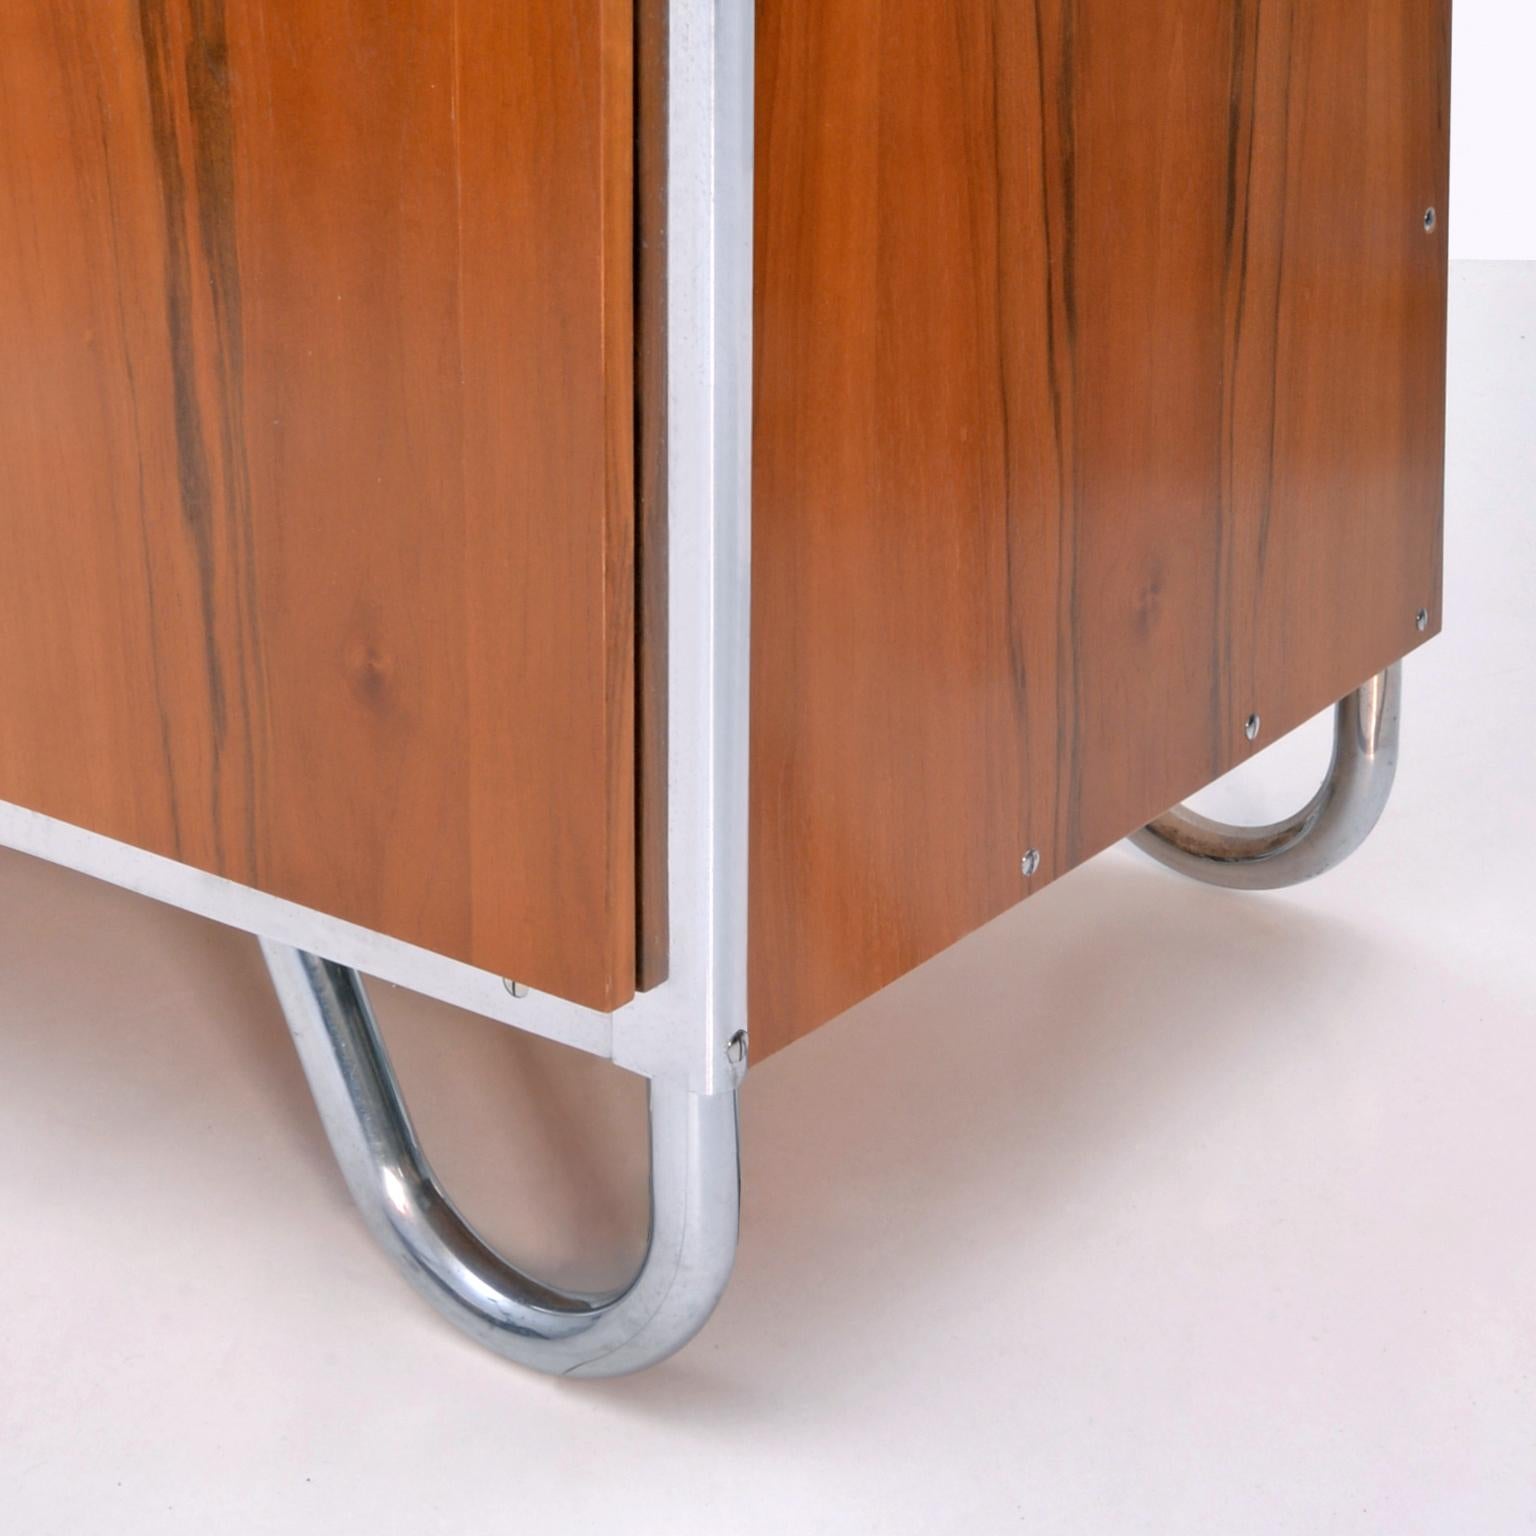 Modernist Cabinet Made Of Chrome Plated Metal And Walnut Veneer, c. 1930 In Good Condition For Sale In Berlin, DE